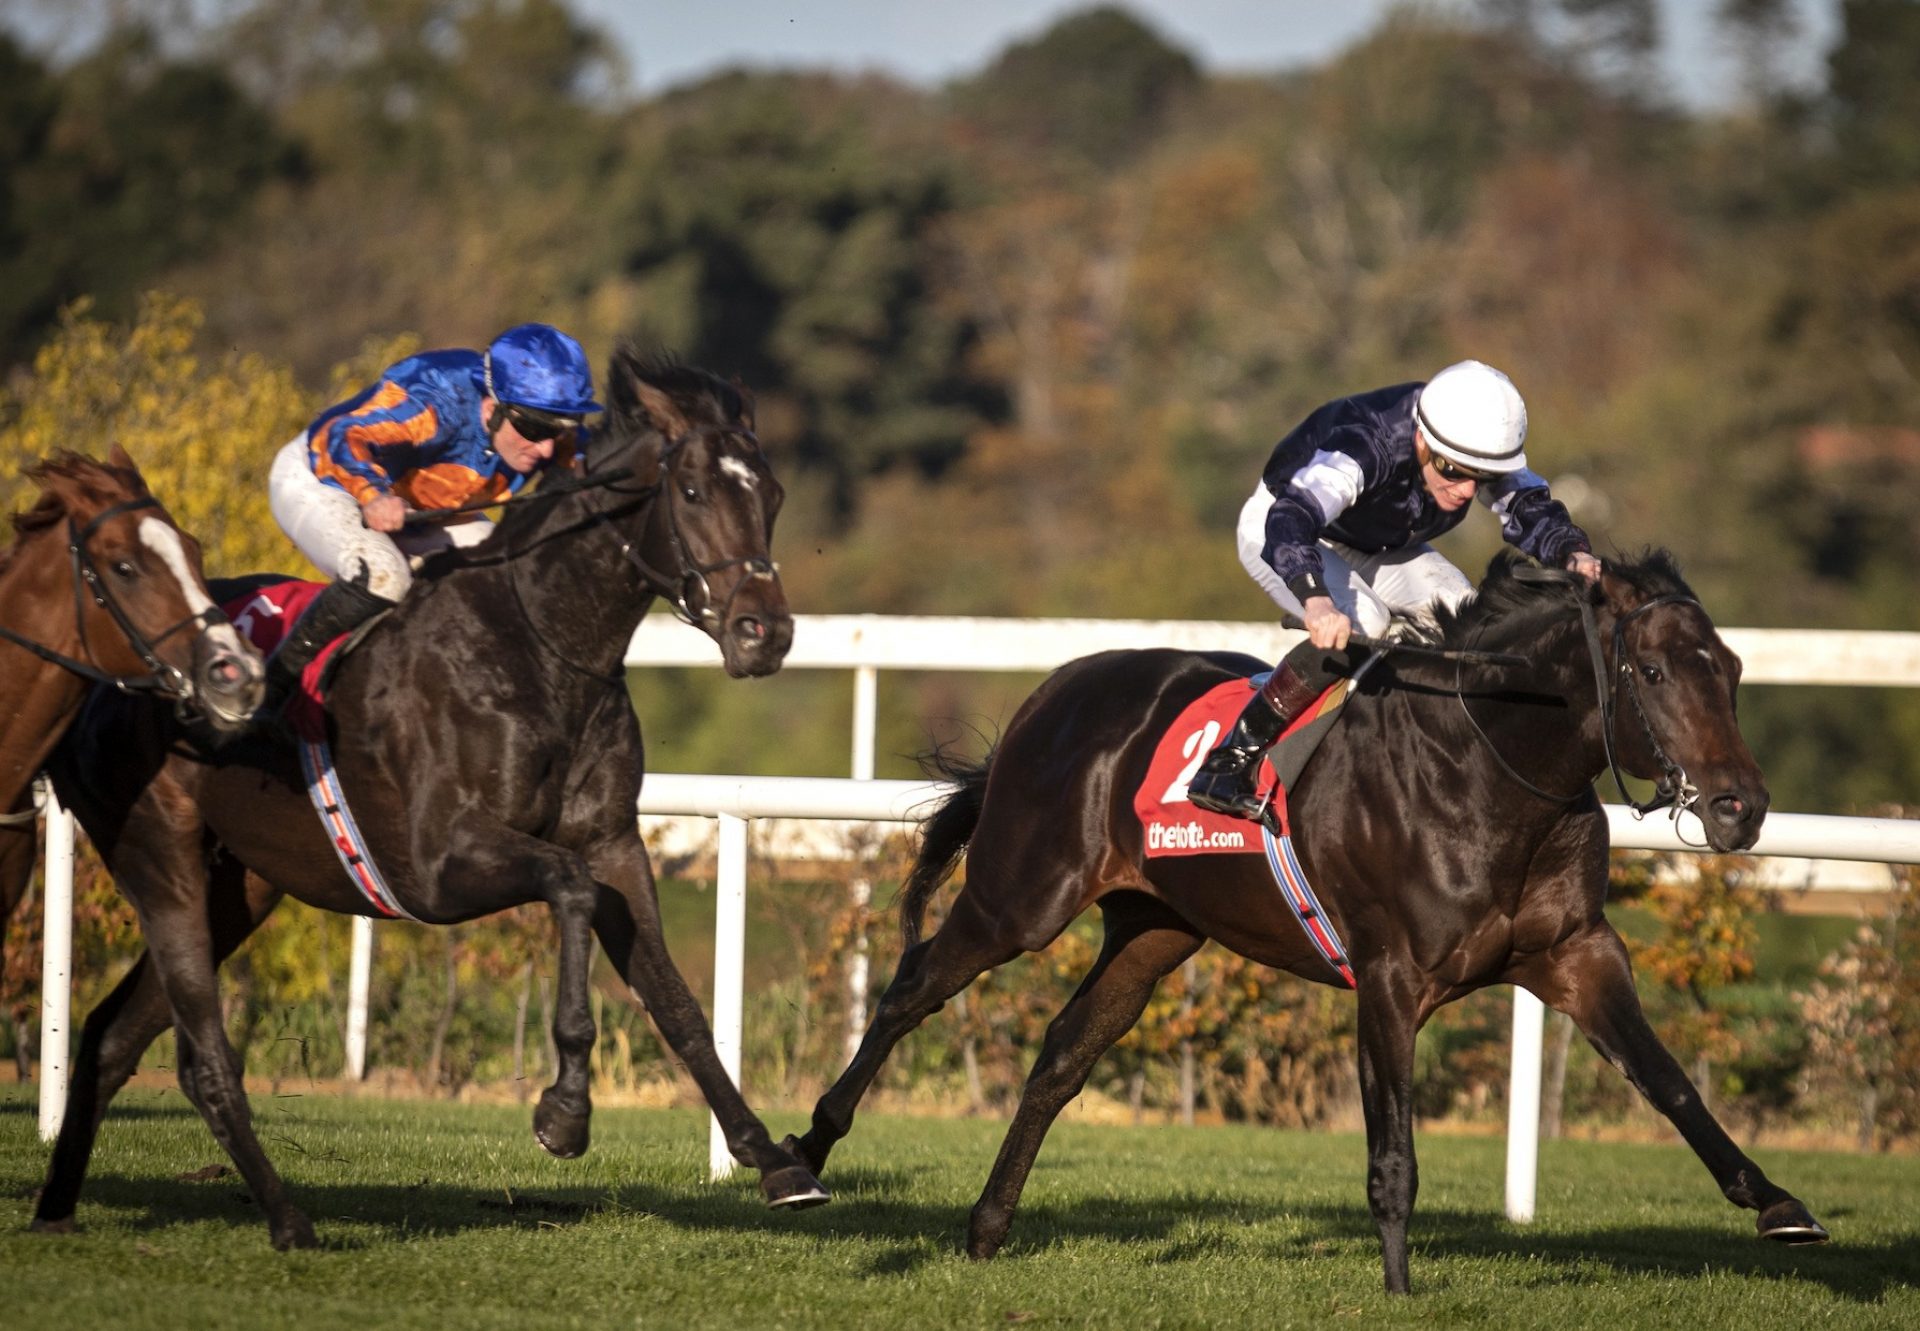 Degraves (Camelot) winning the Gr.3 Eyrefield Stakes at Leopardstown